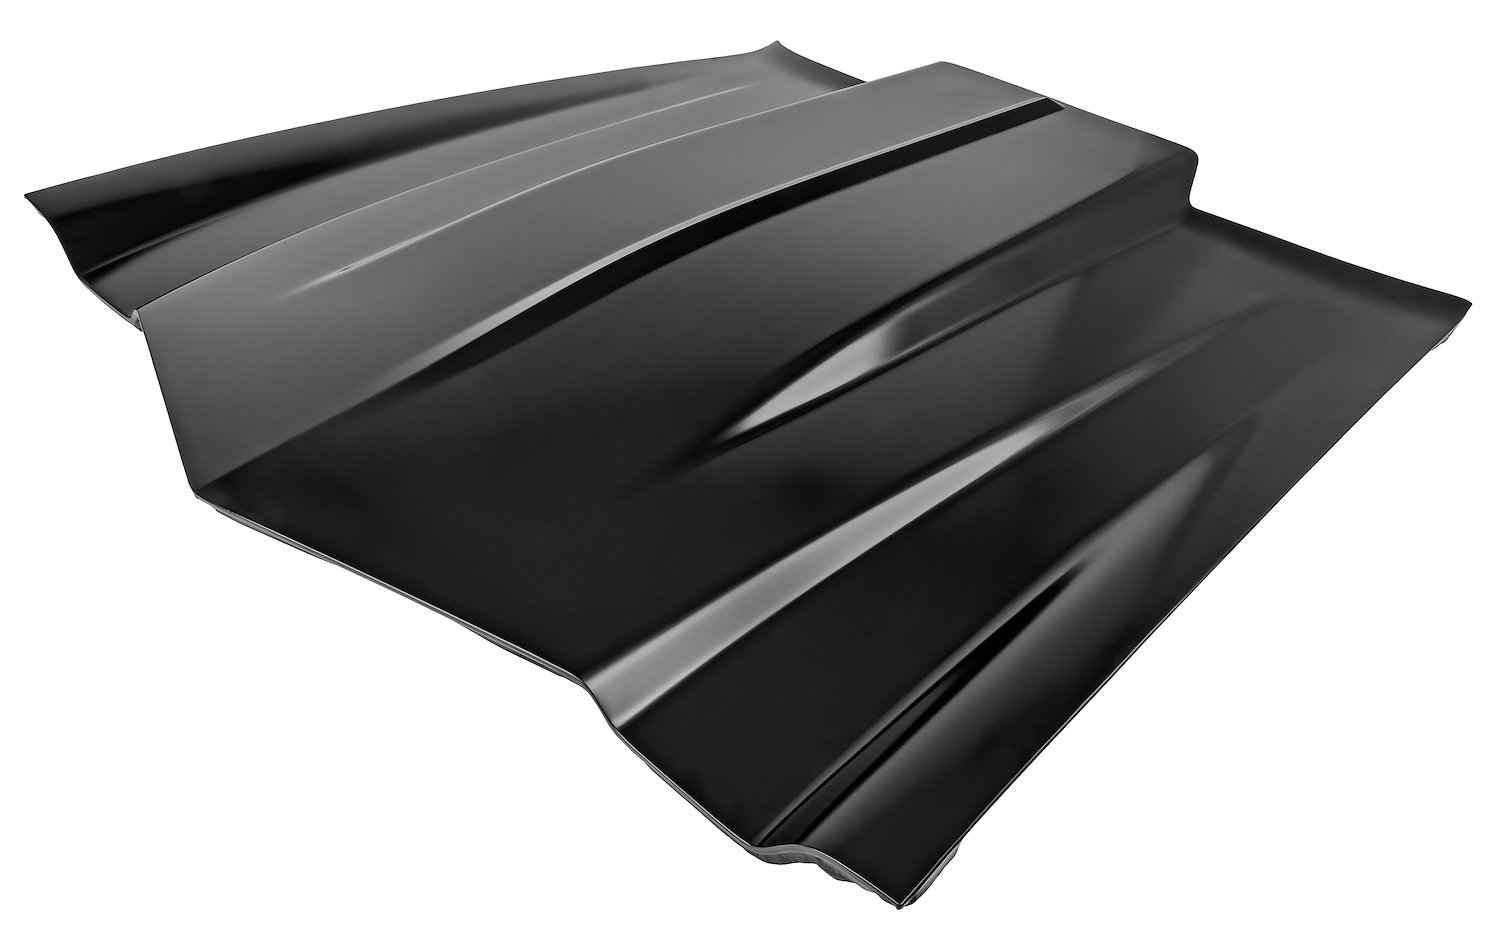 Steel Cowl Induction Hood for 1970-1981 Chevrolet Camaro [2 in. Cowl Induction Scoop]